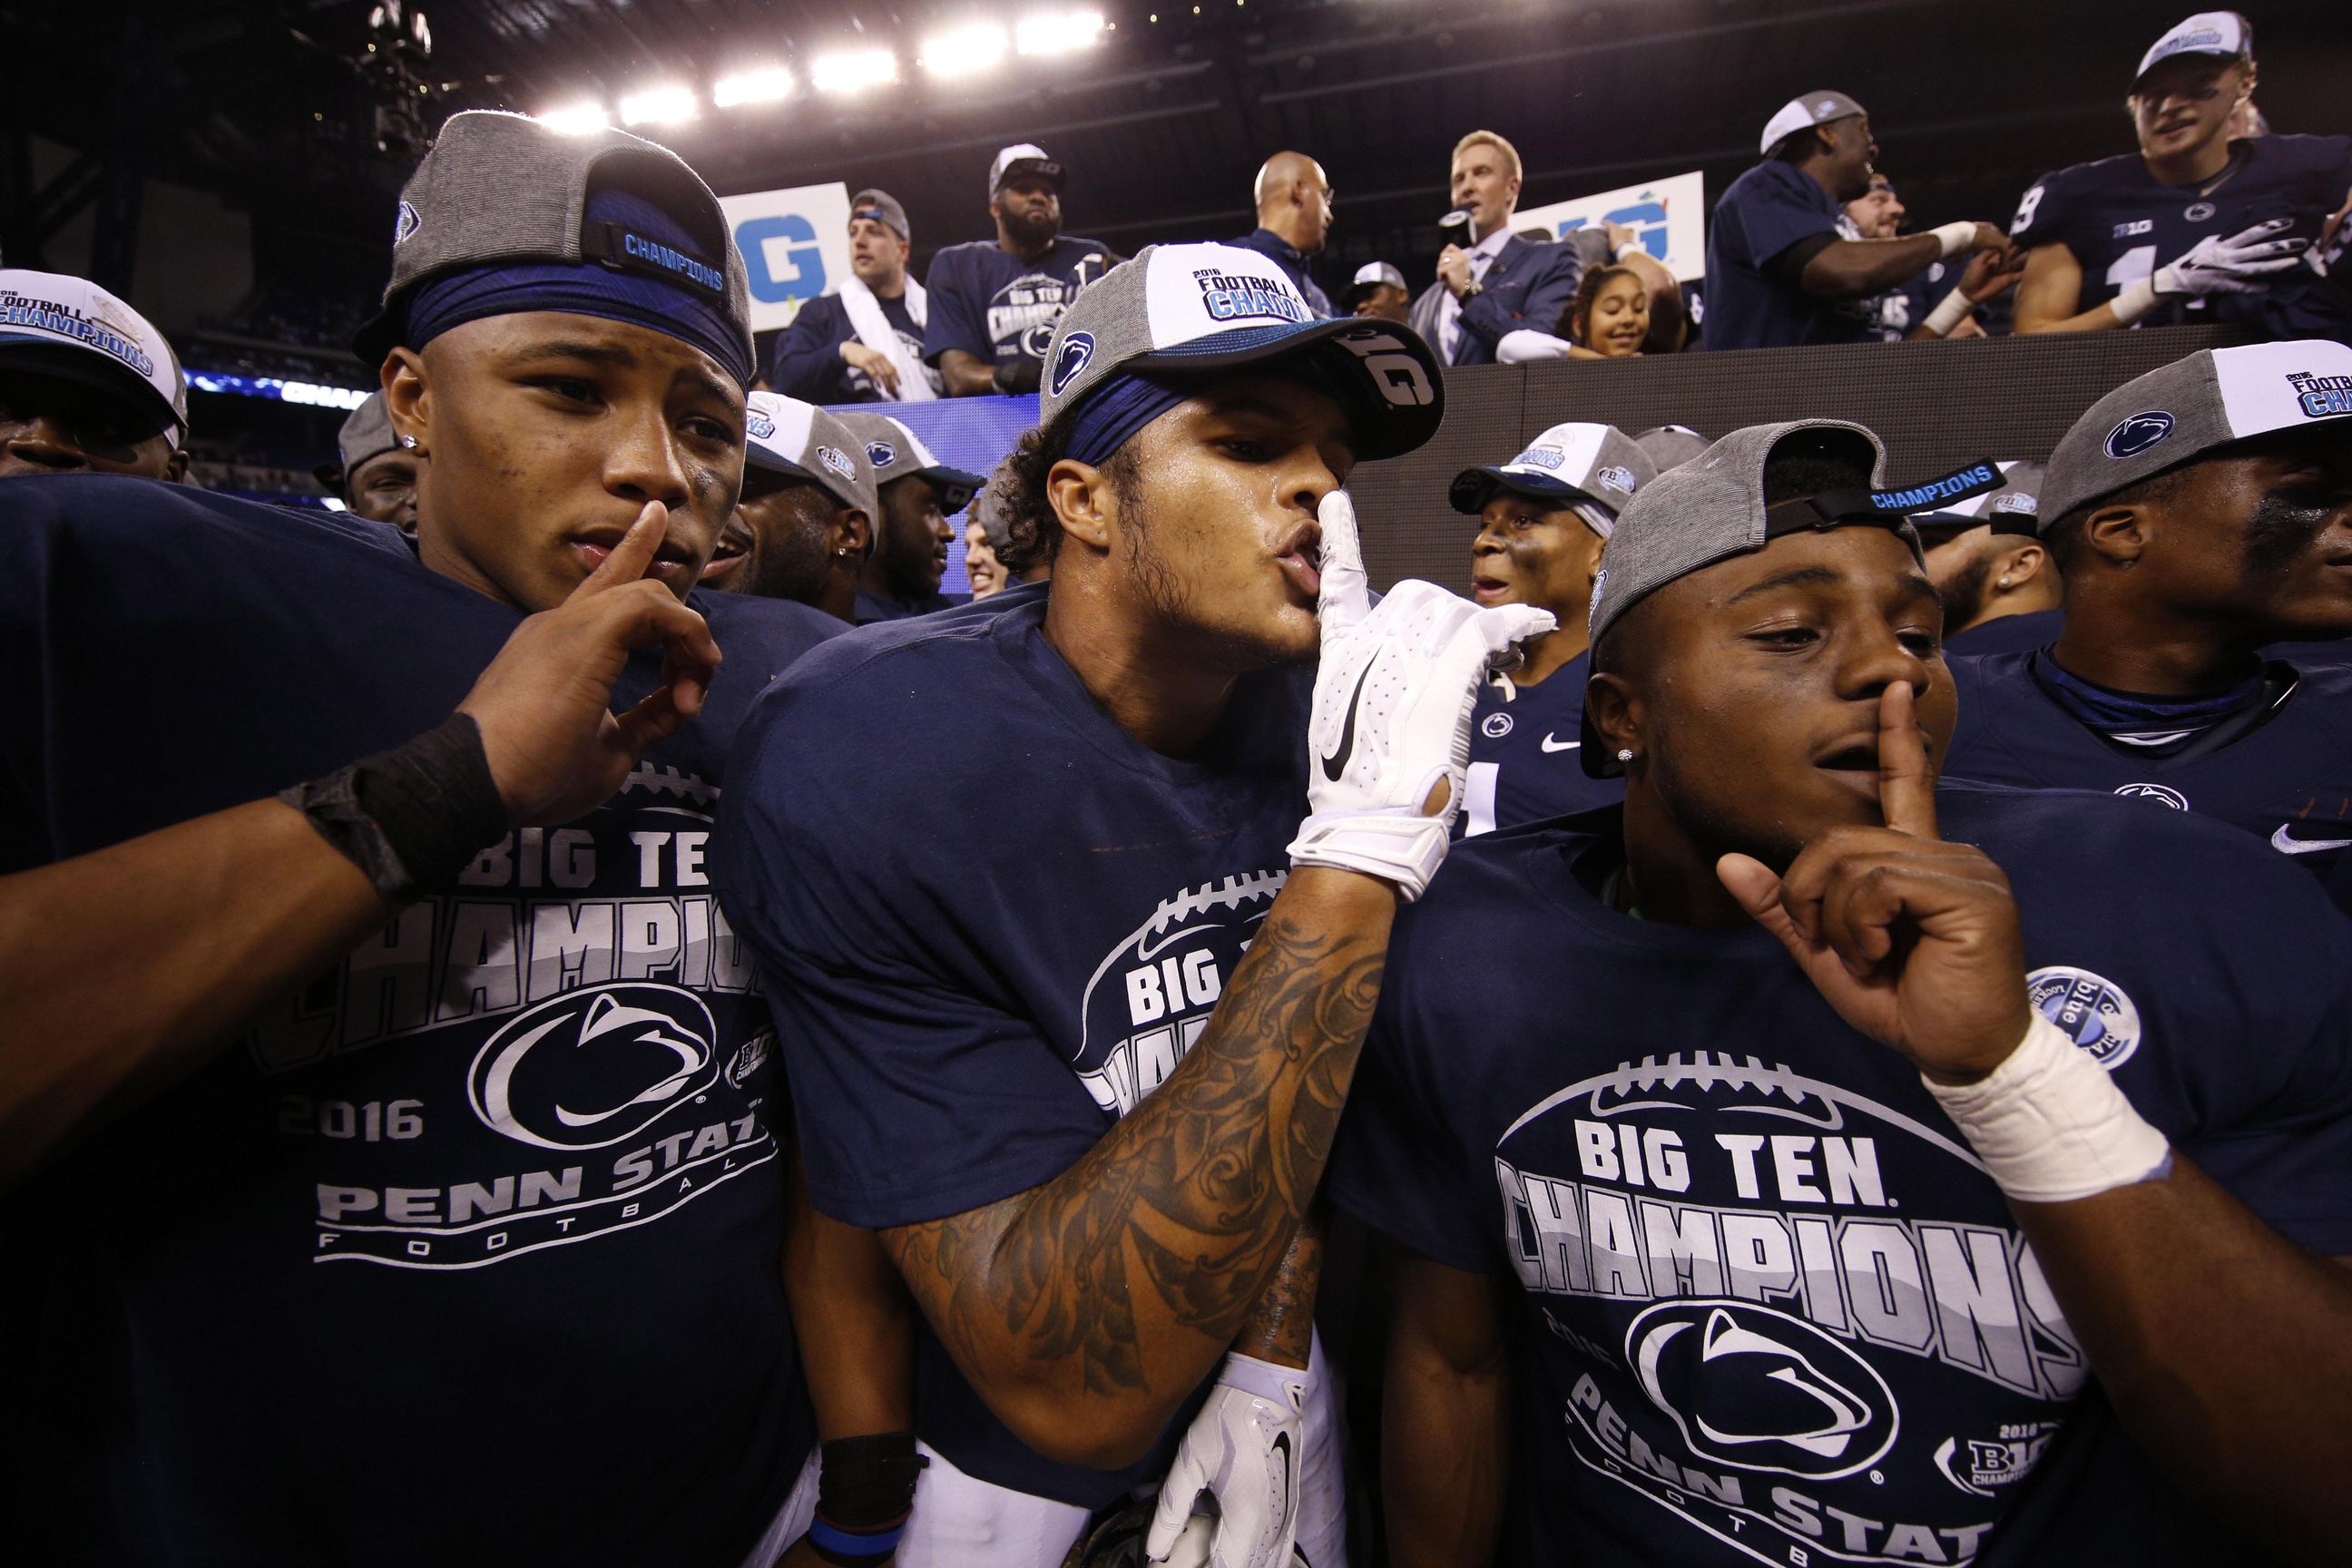 Dec 3, 2016; Indianapolis, IN, USA; Penn State Nittany Lions celebrate after the game against the Wisconsin Badgers during the Big Ten Championship college football game at Lucas Oil Stadium. Penn State defeats Wisconsin 38-31. Mandatory Credit: Brian Spurlock-USA TODAY Sports